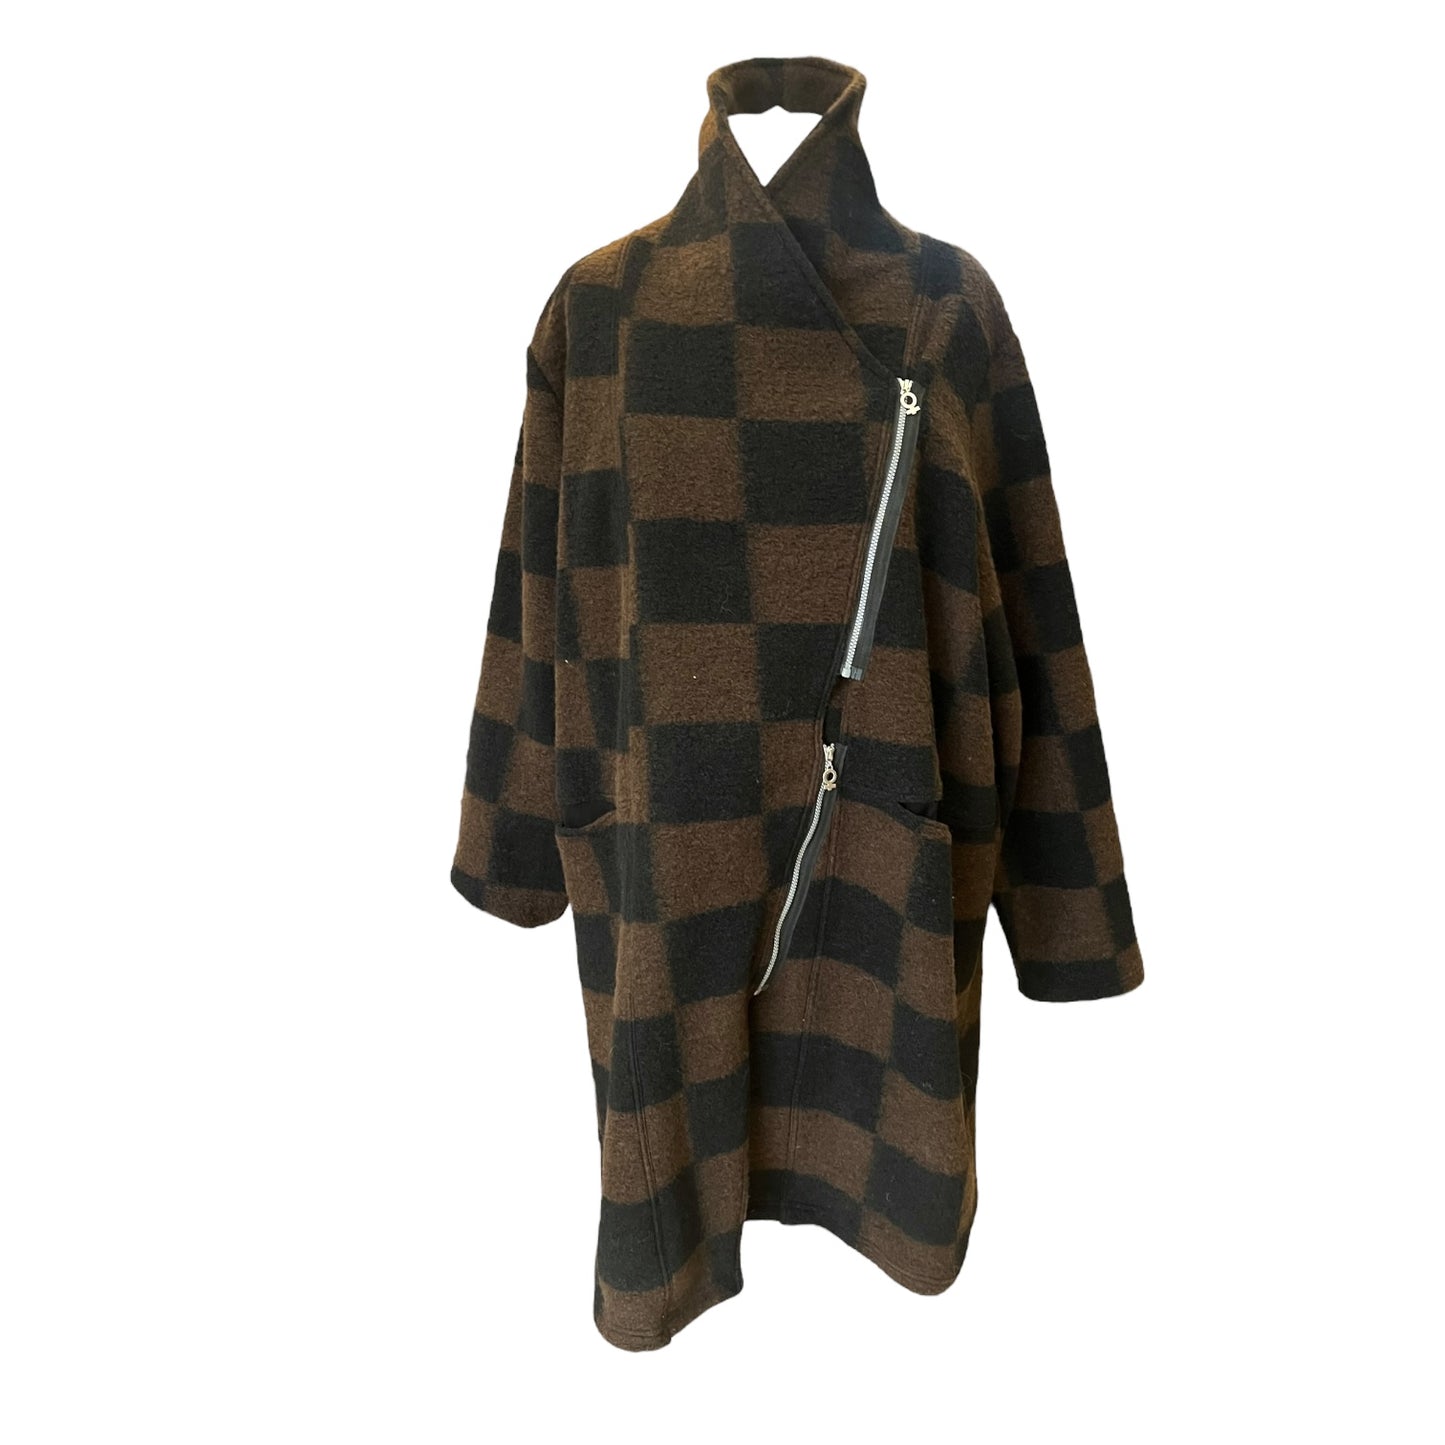 NEW My Soul Brown and Black Check Coat